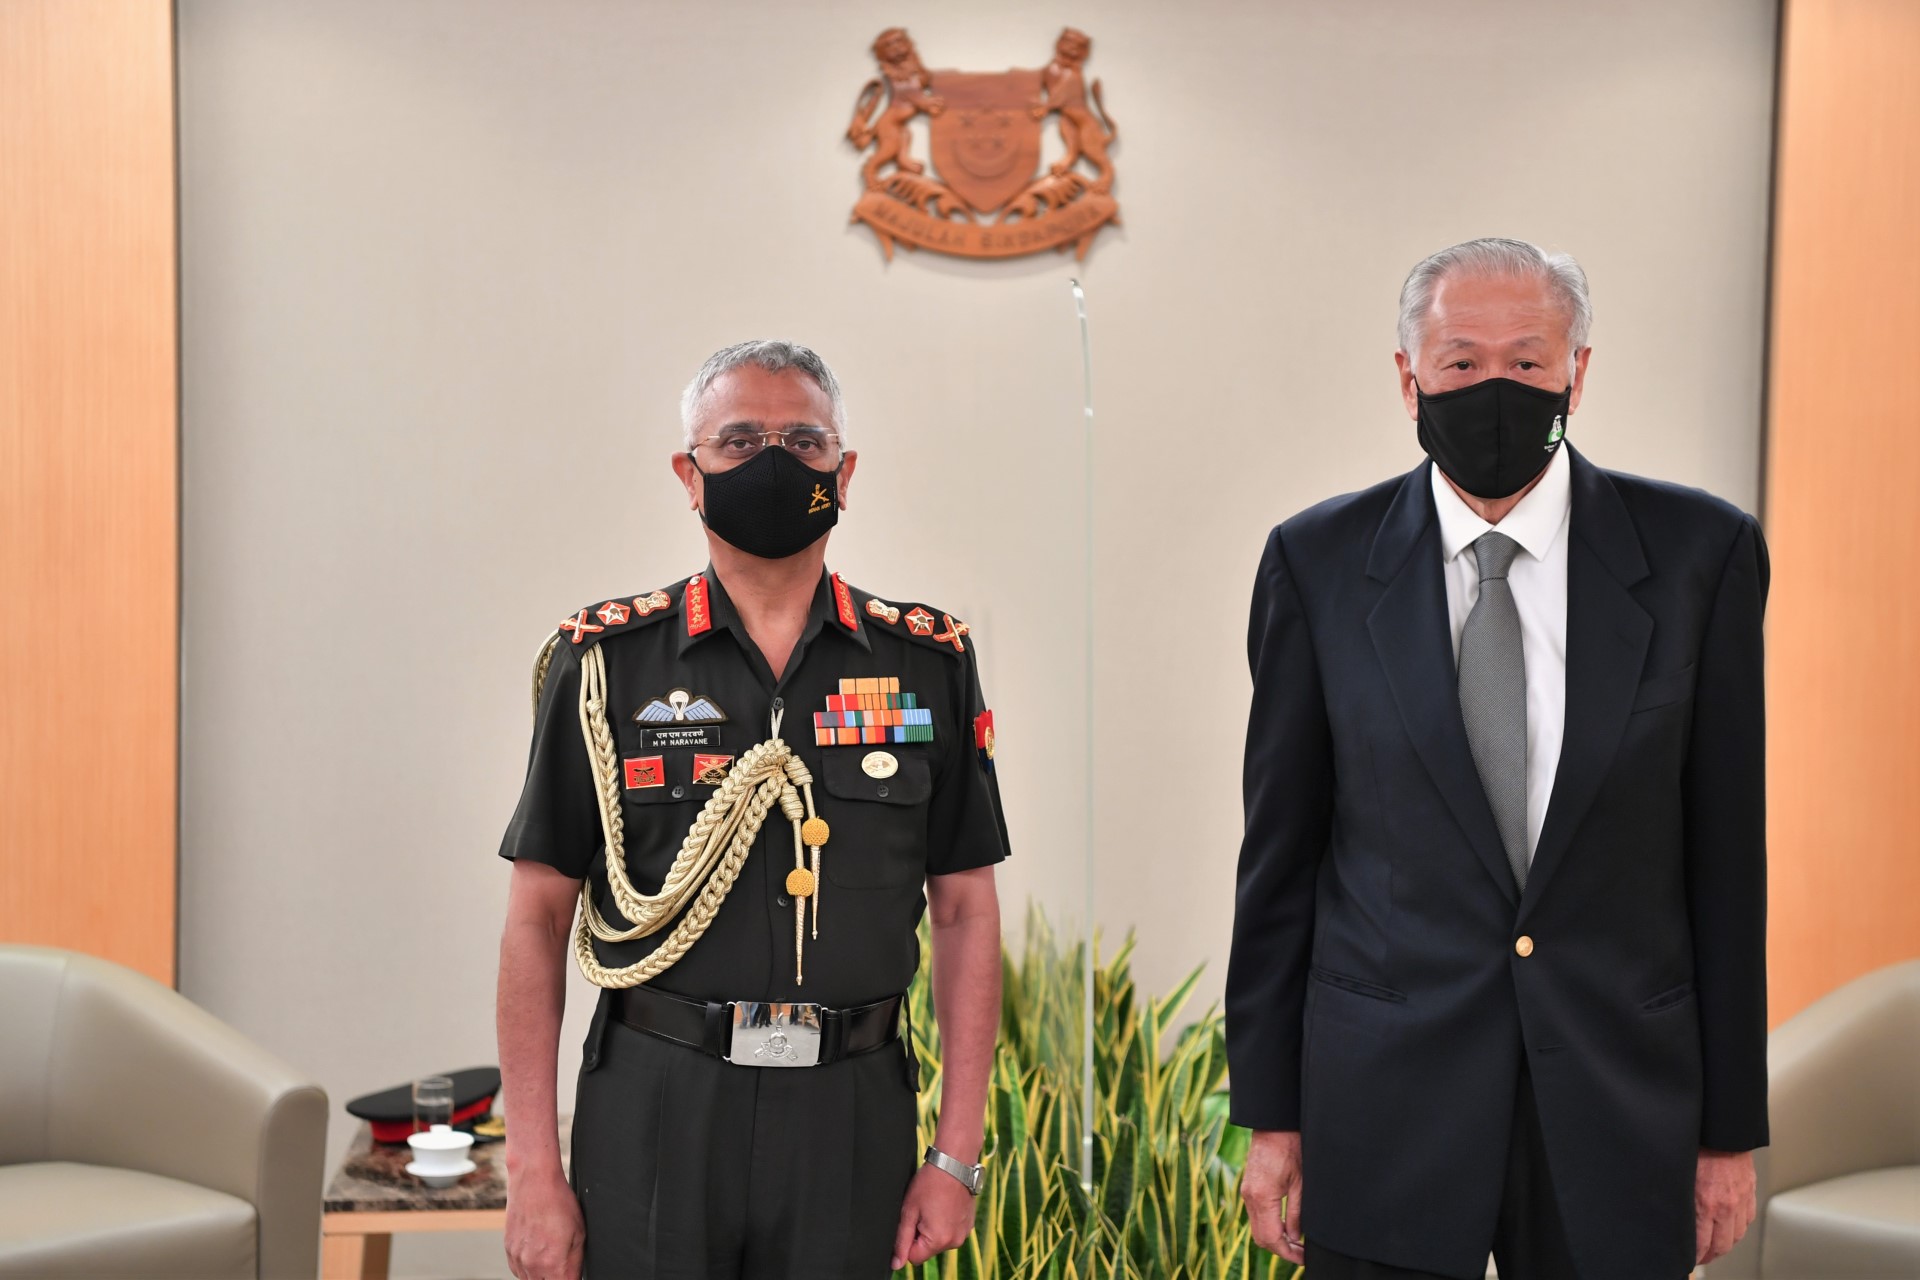 India Chief of the Army Staff General (GEN) Manoj Mukund Naravane calling on Minister for Defence Dr Ng Eng Hen at the Ministry of Defence (MINDEF) this morning.